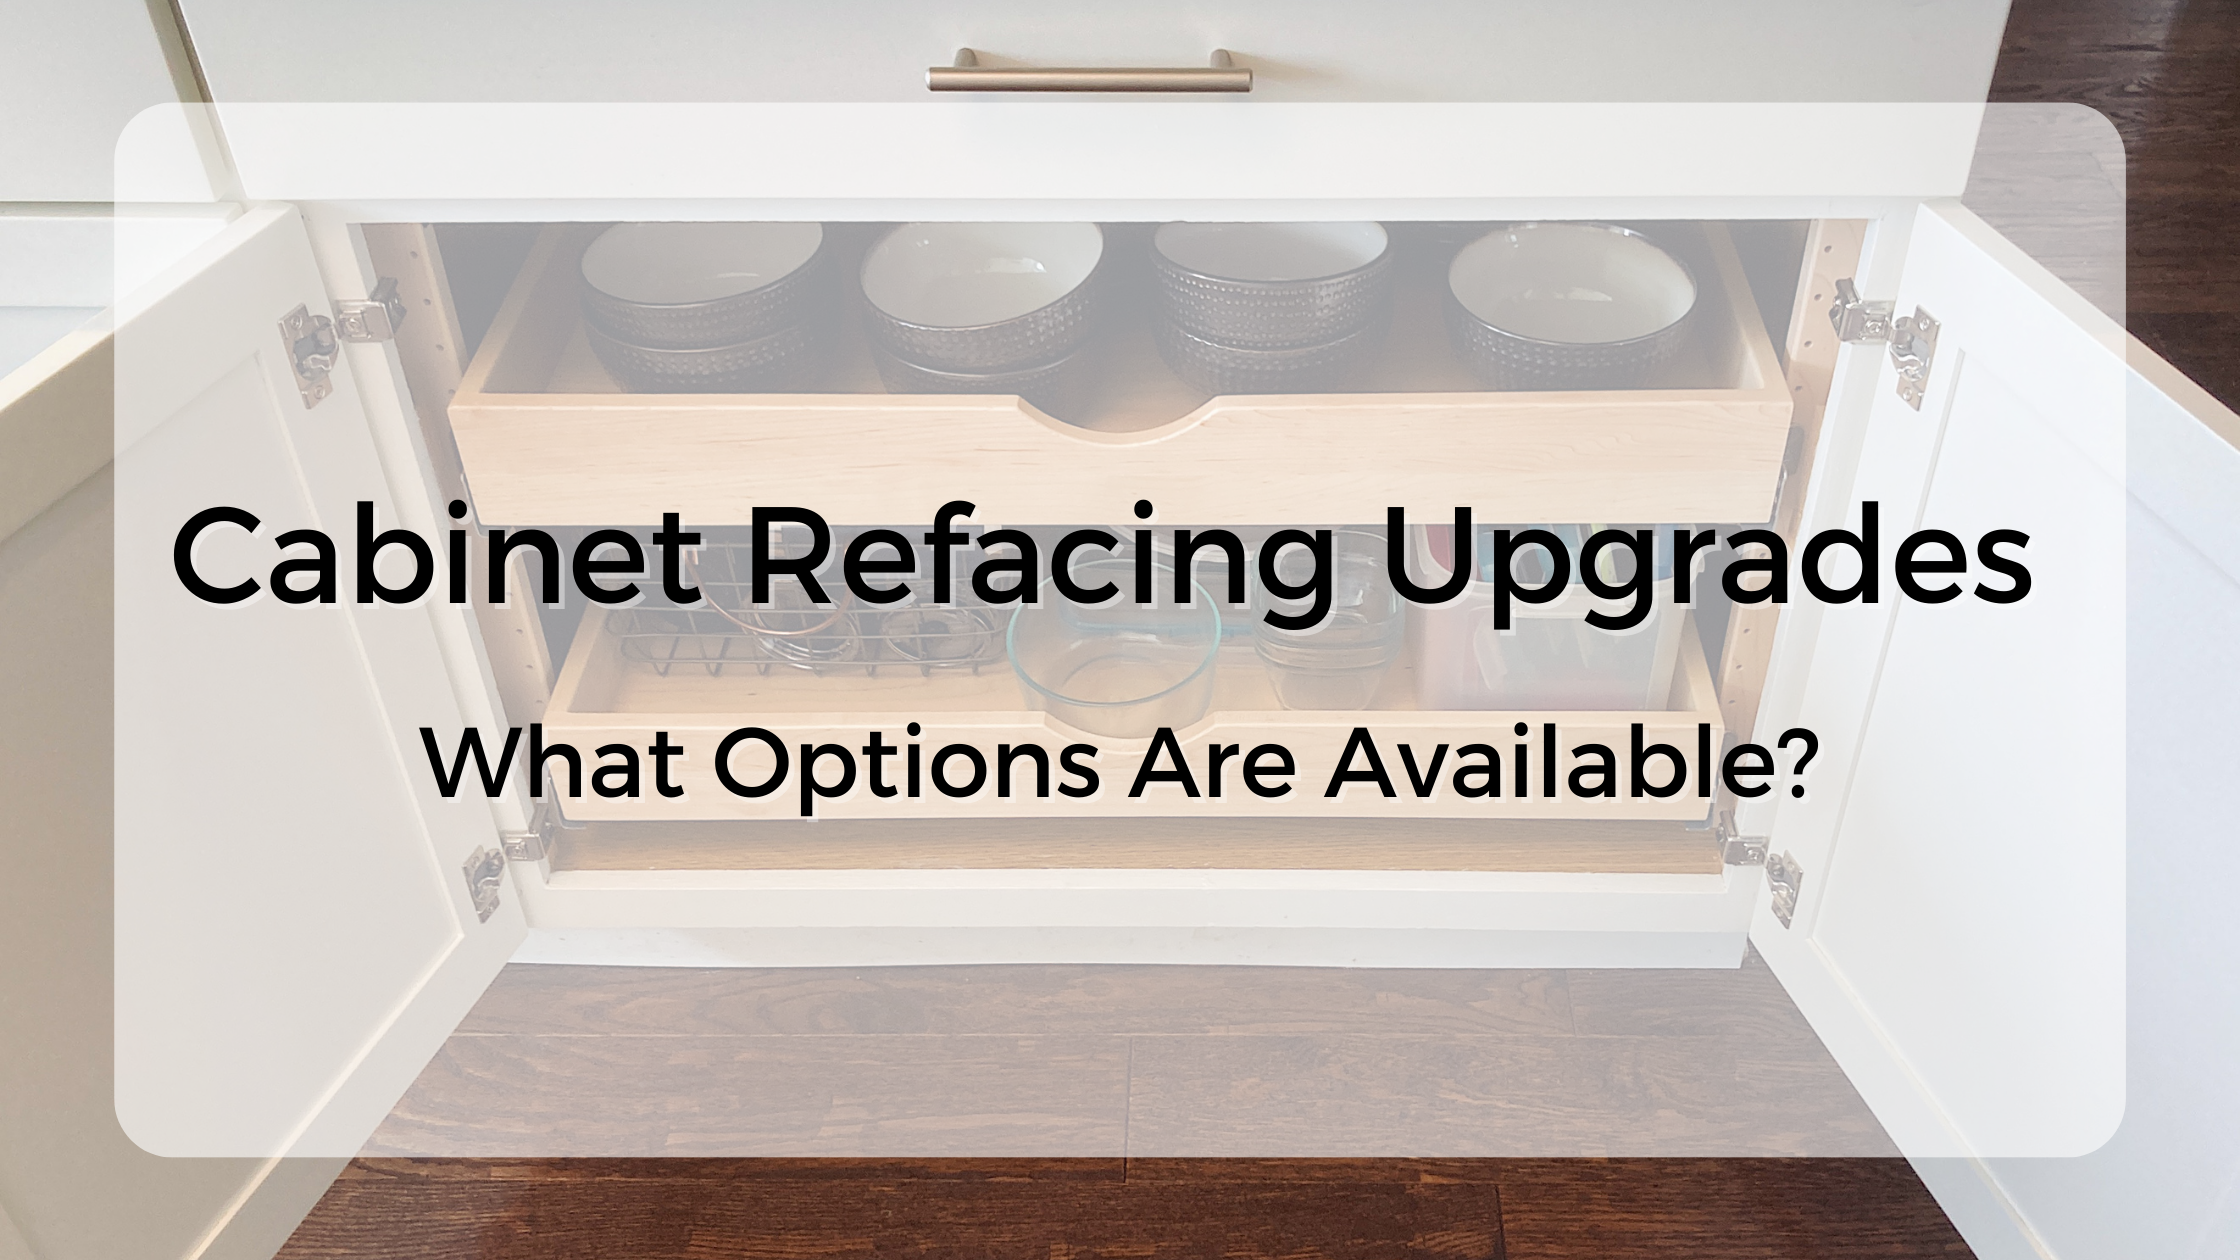 Cabinet Refacing Upgrades - What Options Are Available